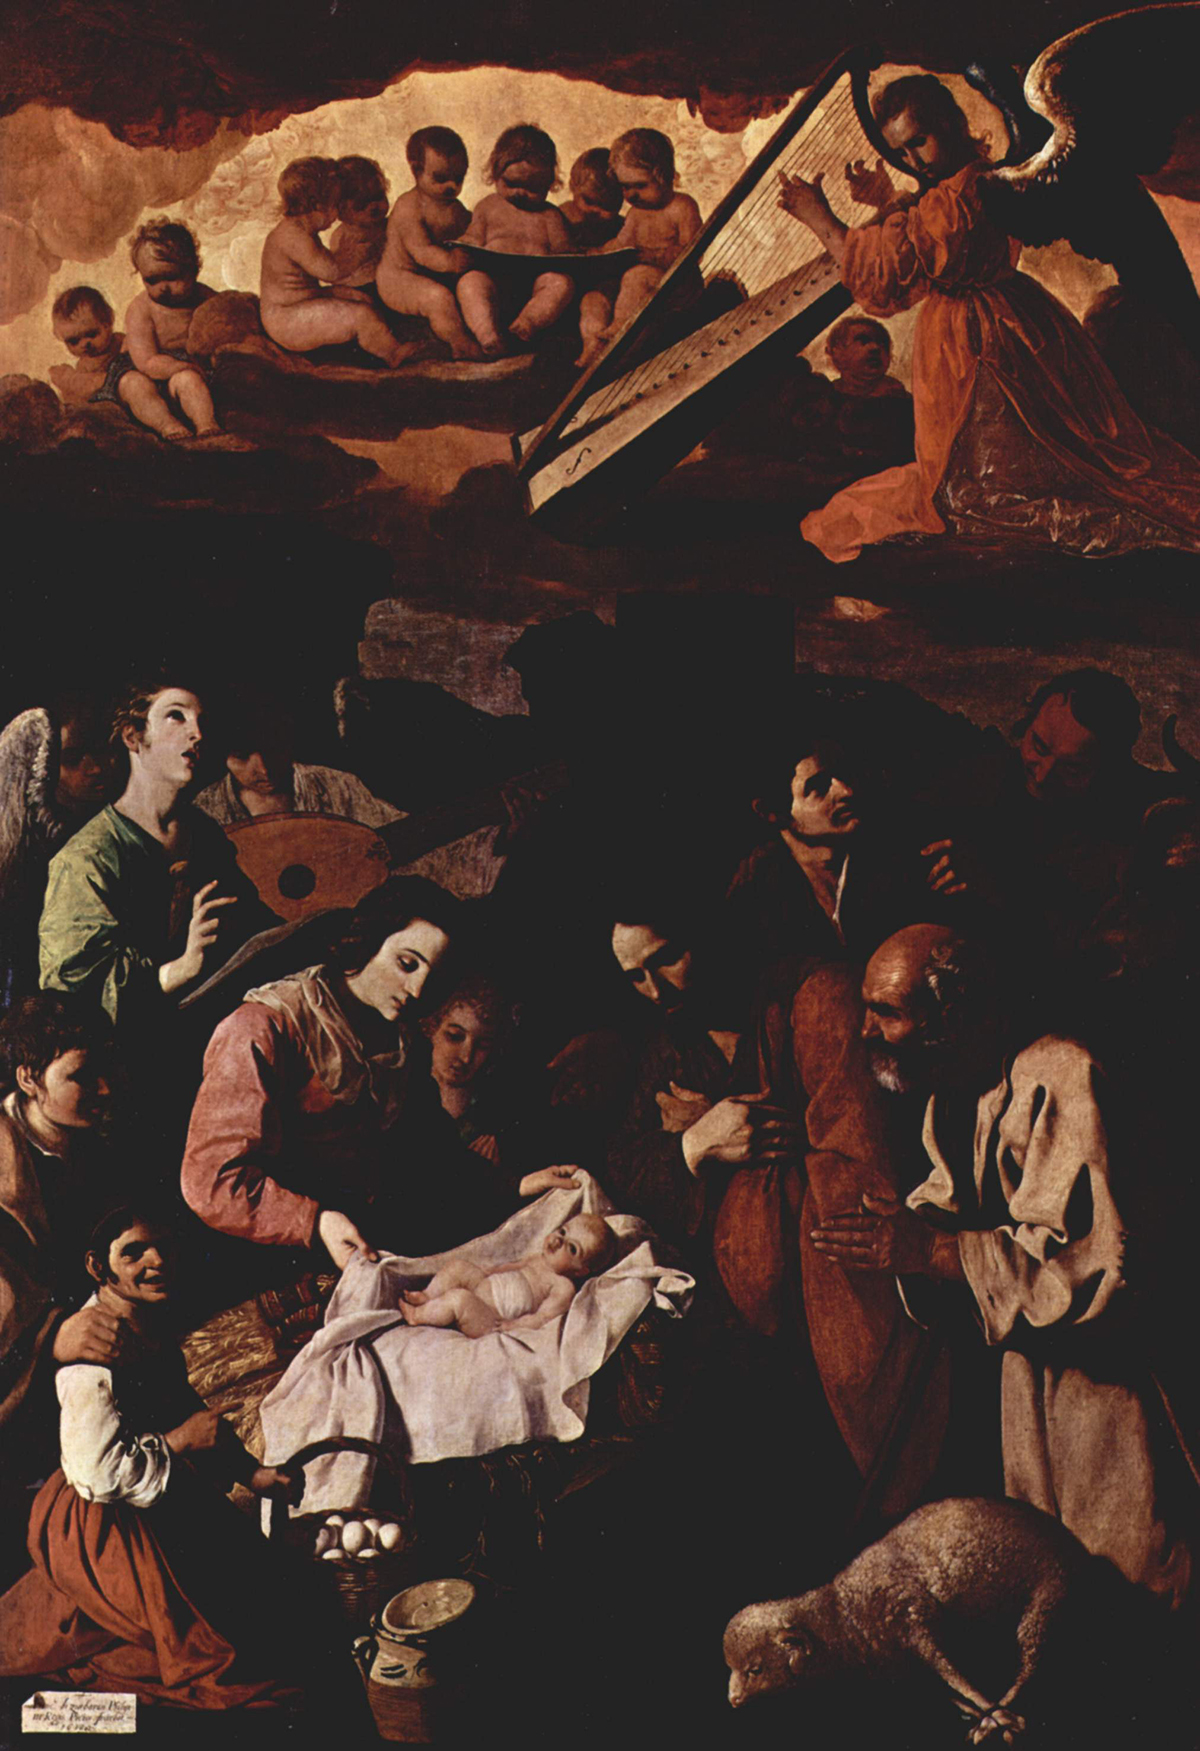 ADORATION OF THE SHEPHERDS